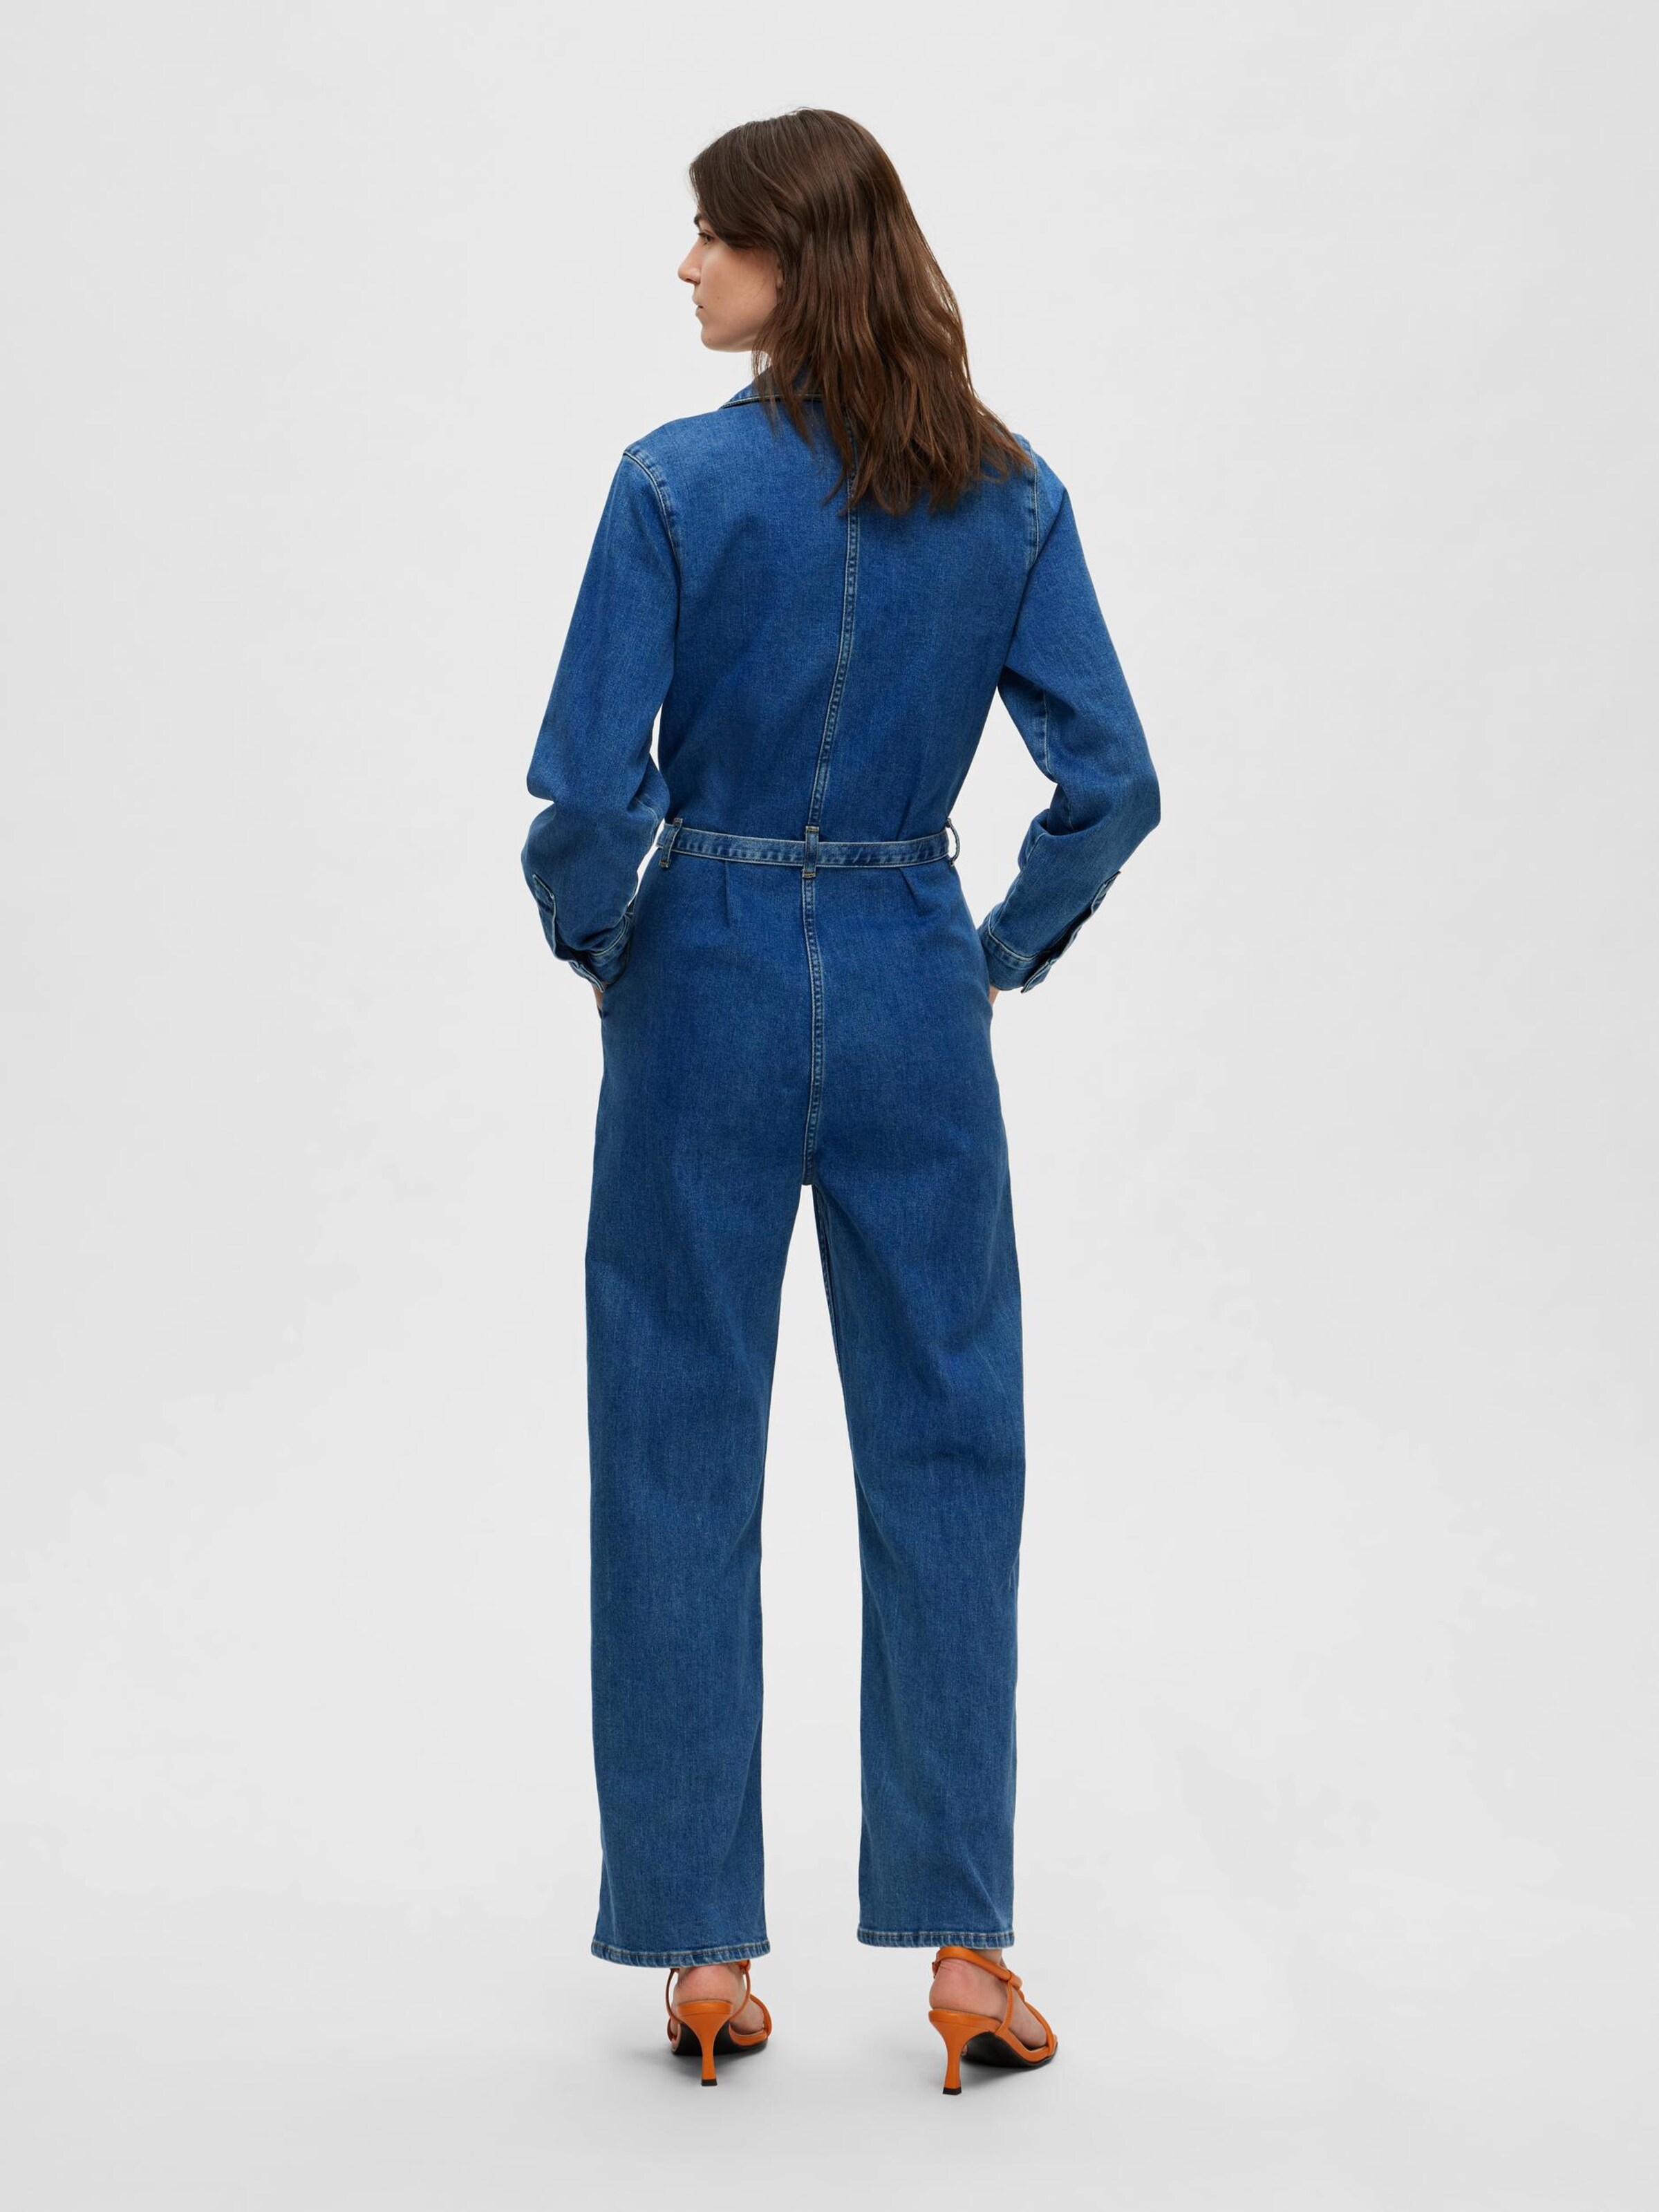 Buy Women's Long Sleeve Denim Jean Jumpsuit Overalls/bodysuit High Waist,  Zip Front Playsuit, Moto Playsuit With Snake Embroidered on the Back.  Online in India - Etsy